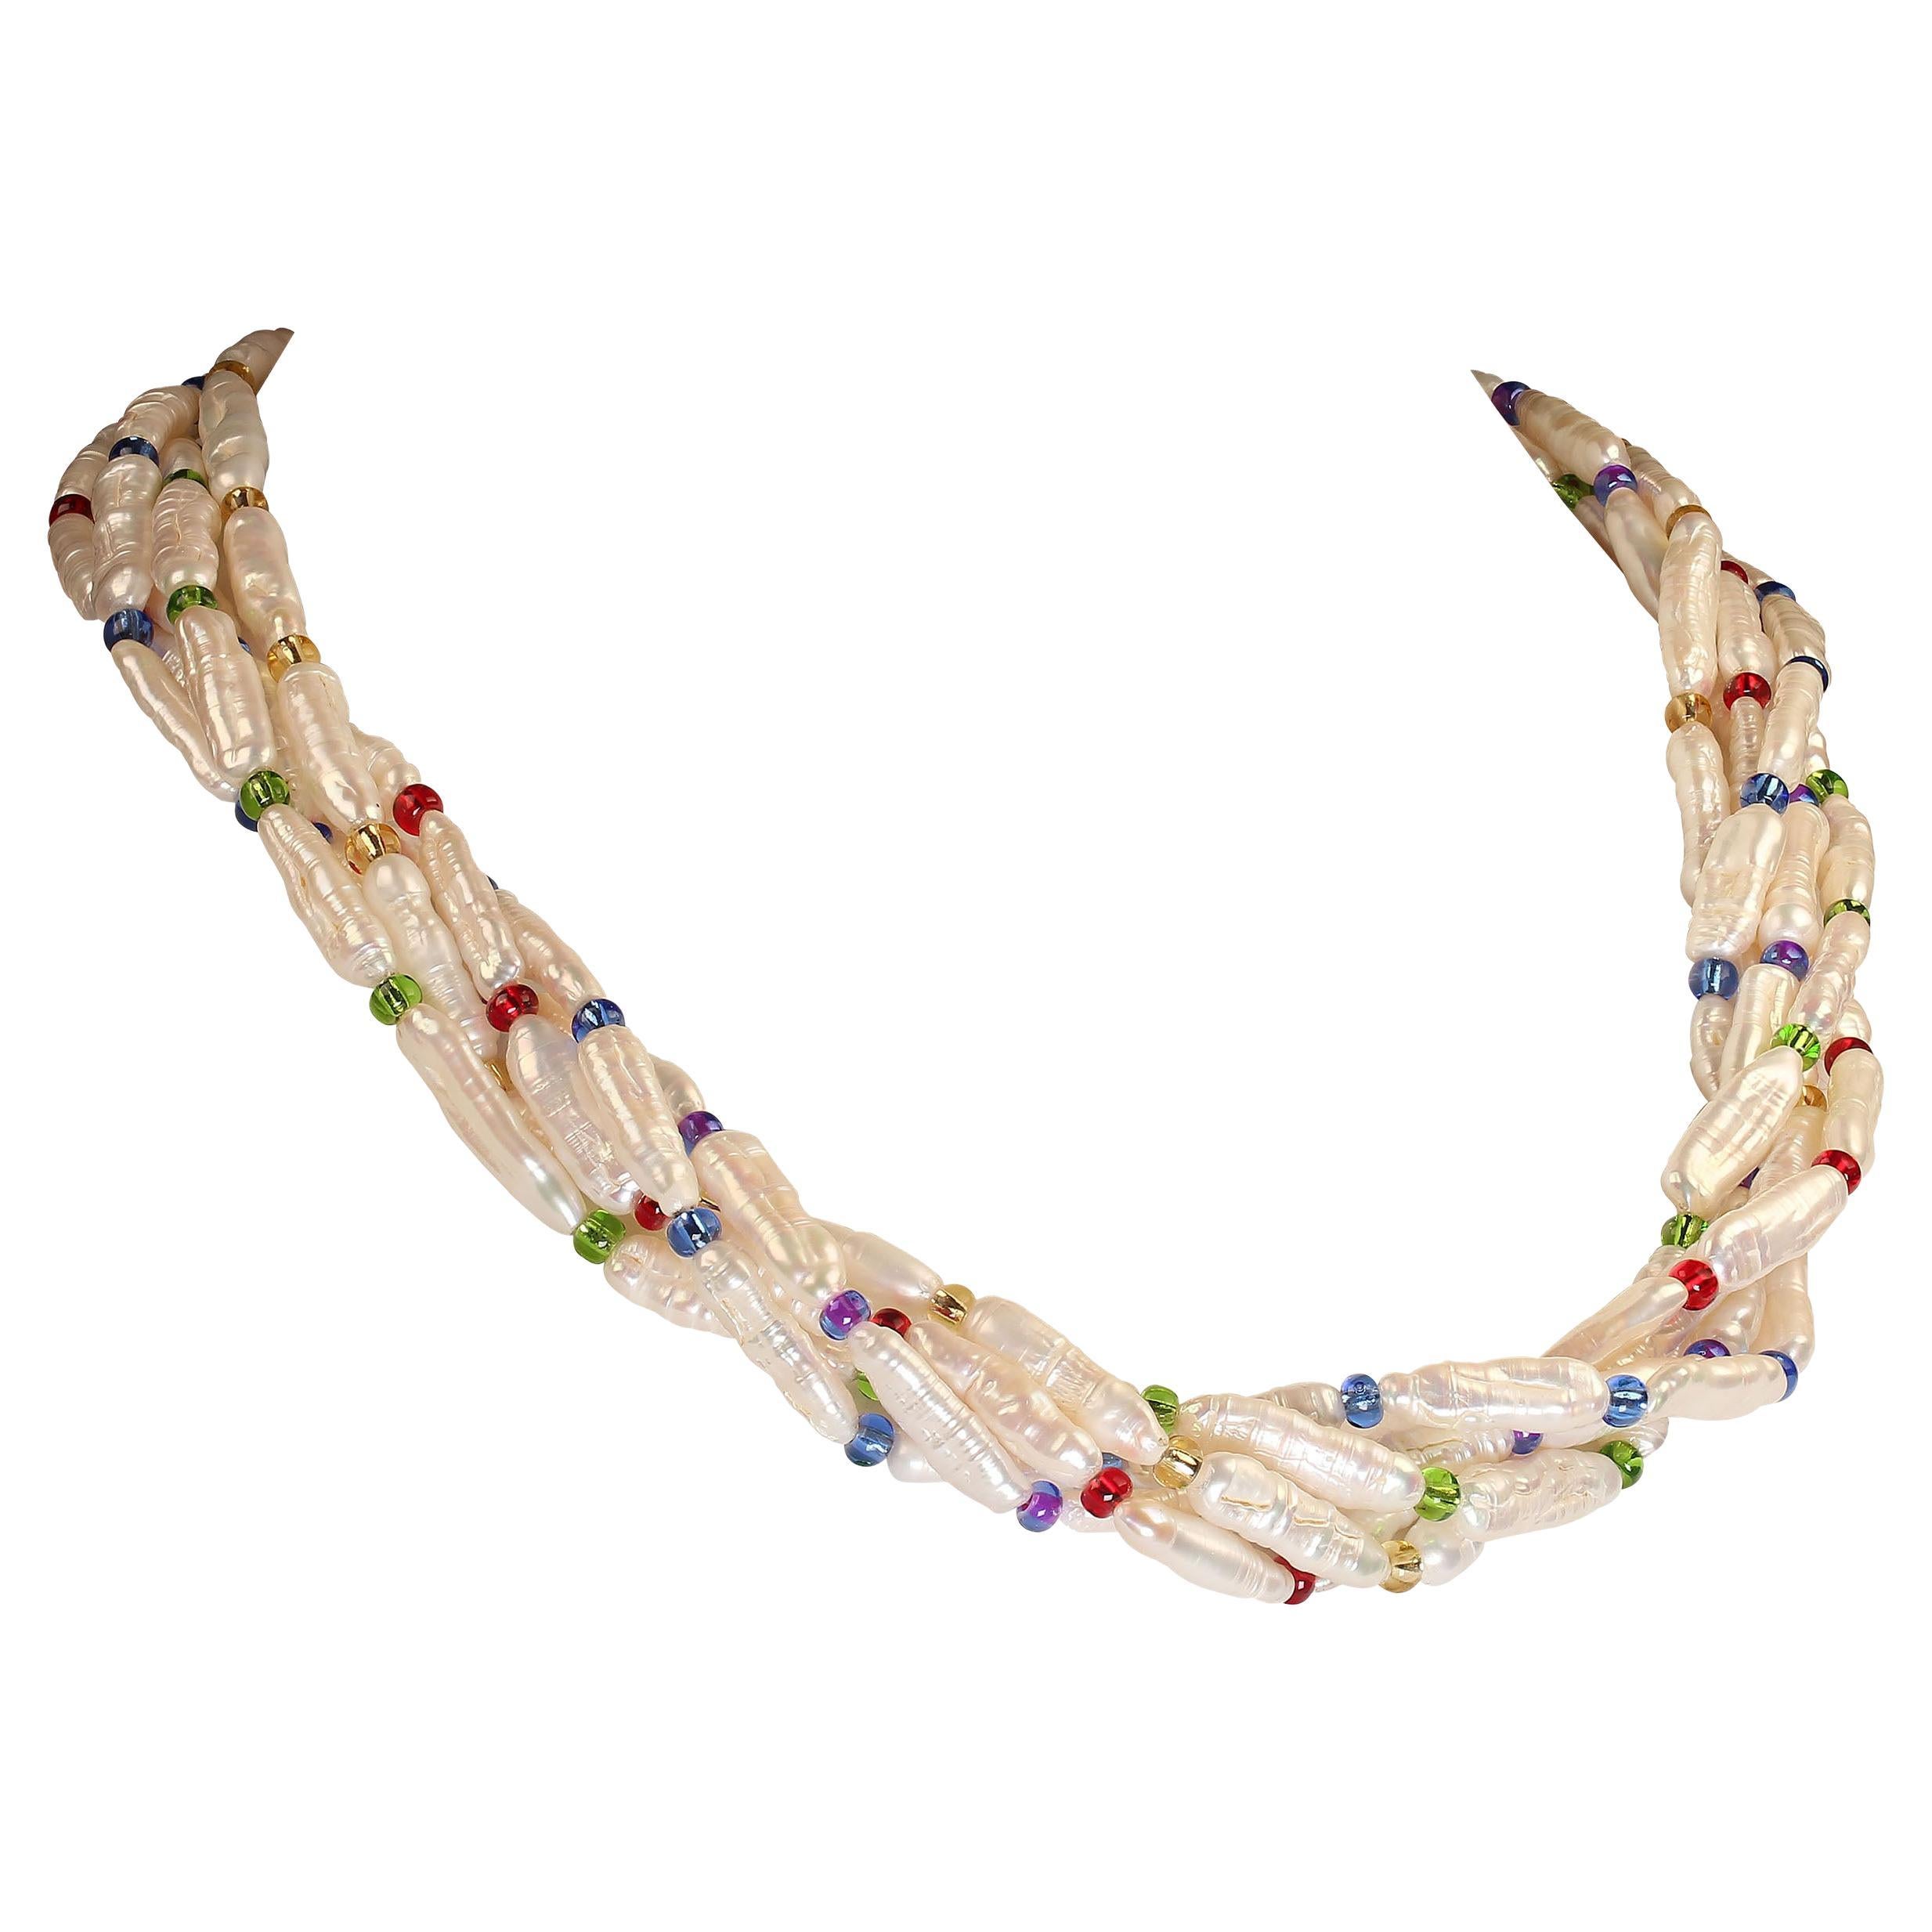 'Put on your Pearls Girls'  Lulu Guinness

Bright Statement Necklace of Pearls and Five colors of Czech beads:  Red, Blue, Green, Gold, and Purple.  The necklace features a gold tone filigree box clasp which can easily be a focal.  The long, barrel